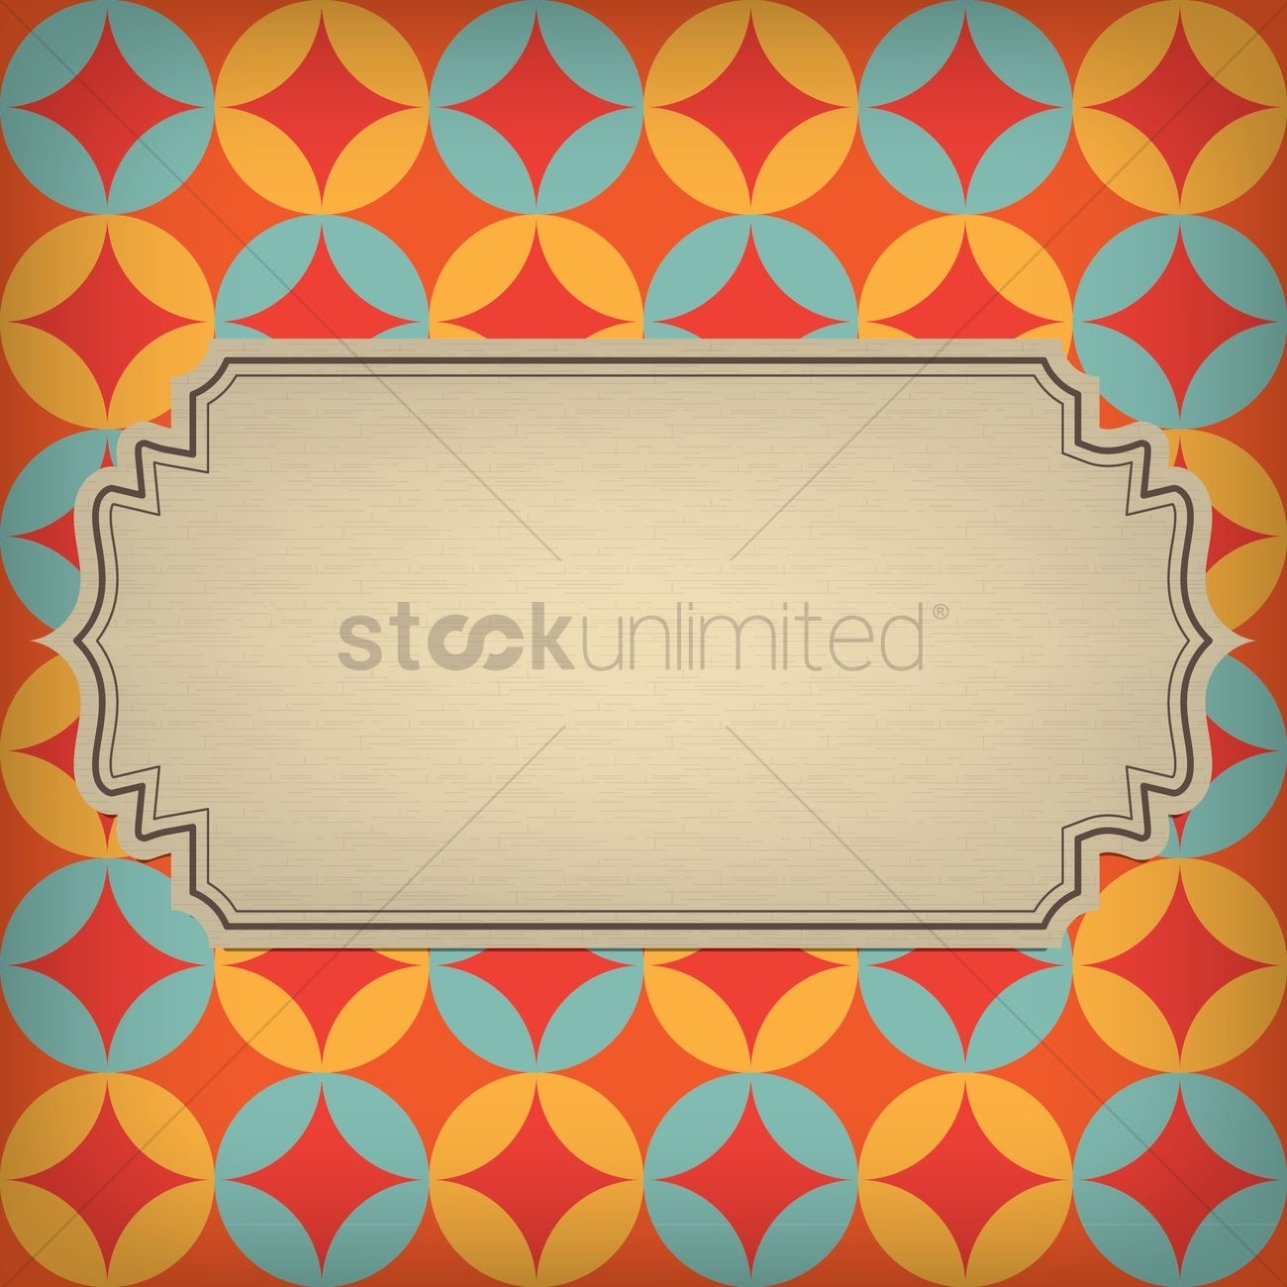 Free Greeting Card Template Design Vector Image - 1625292 | Stockunlimited Pertaining To Greeting Card Layout Templates